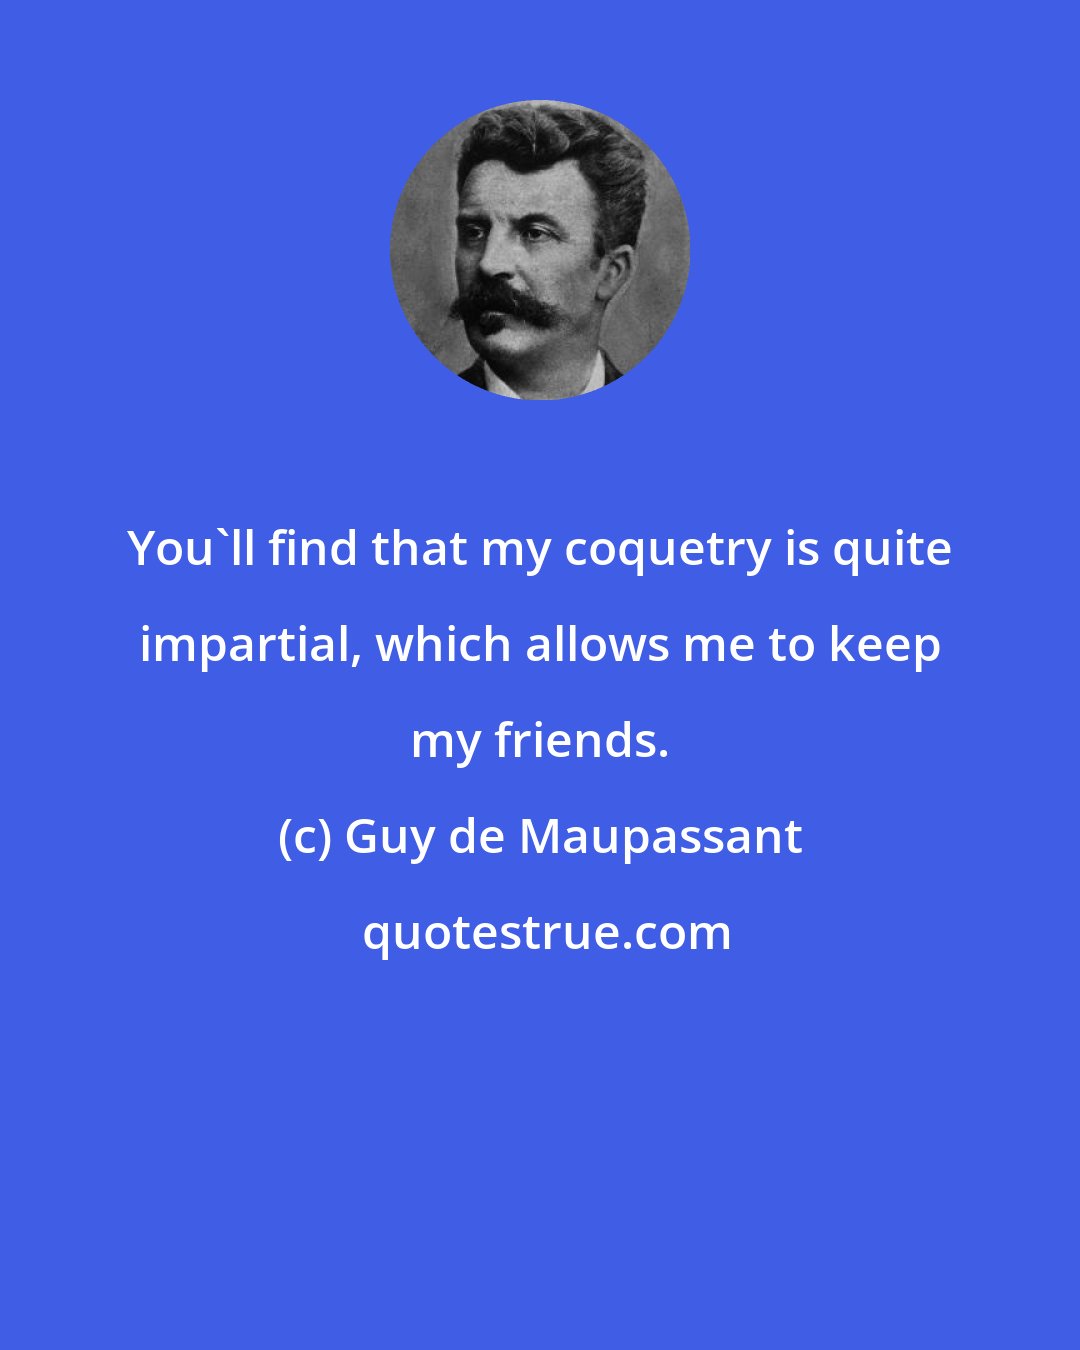 Guy de Maupassant: You'll find that my coquetry is quite impartial, which allows me to keep my friends.